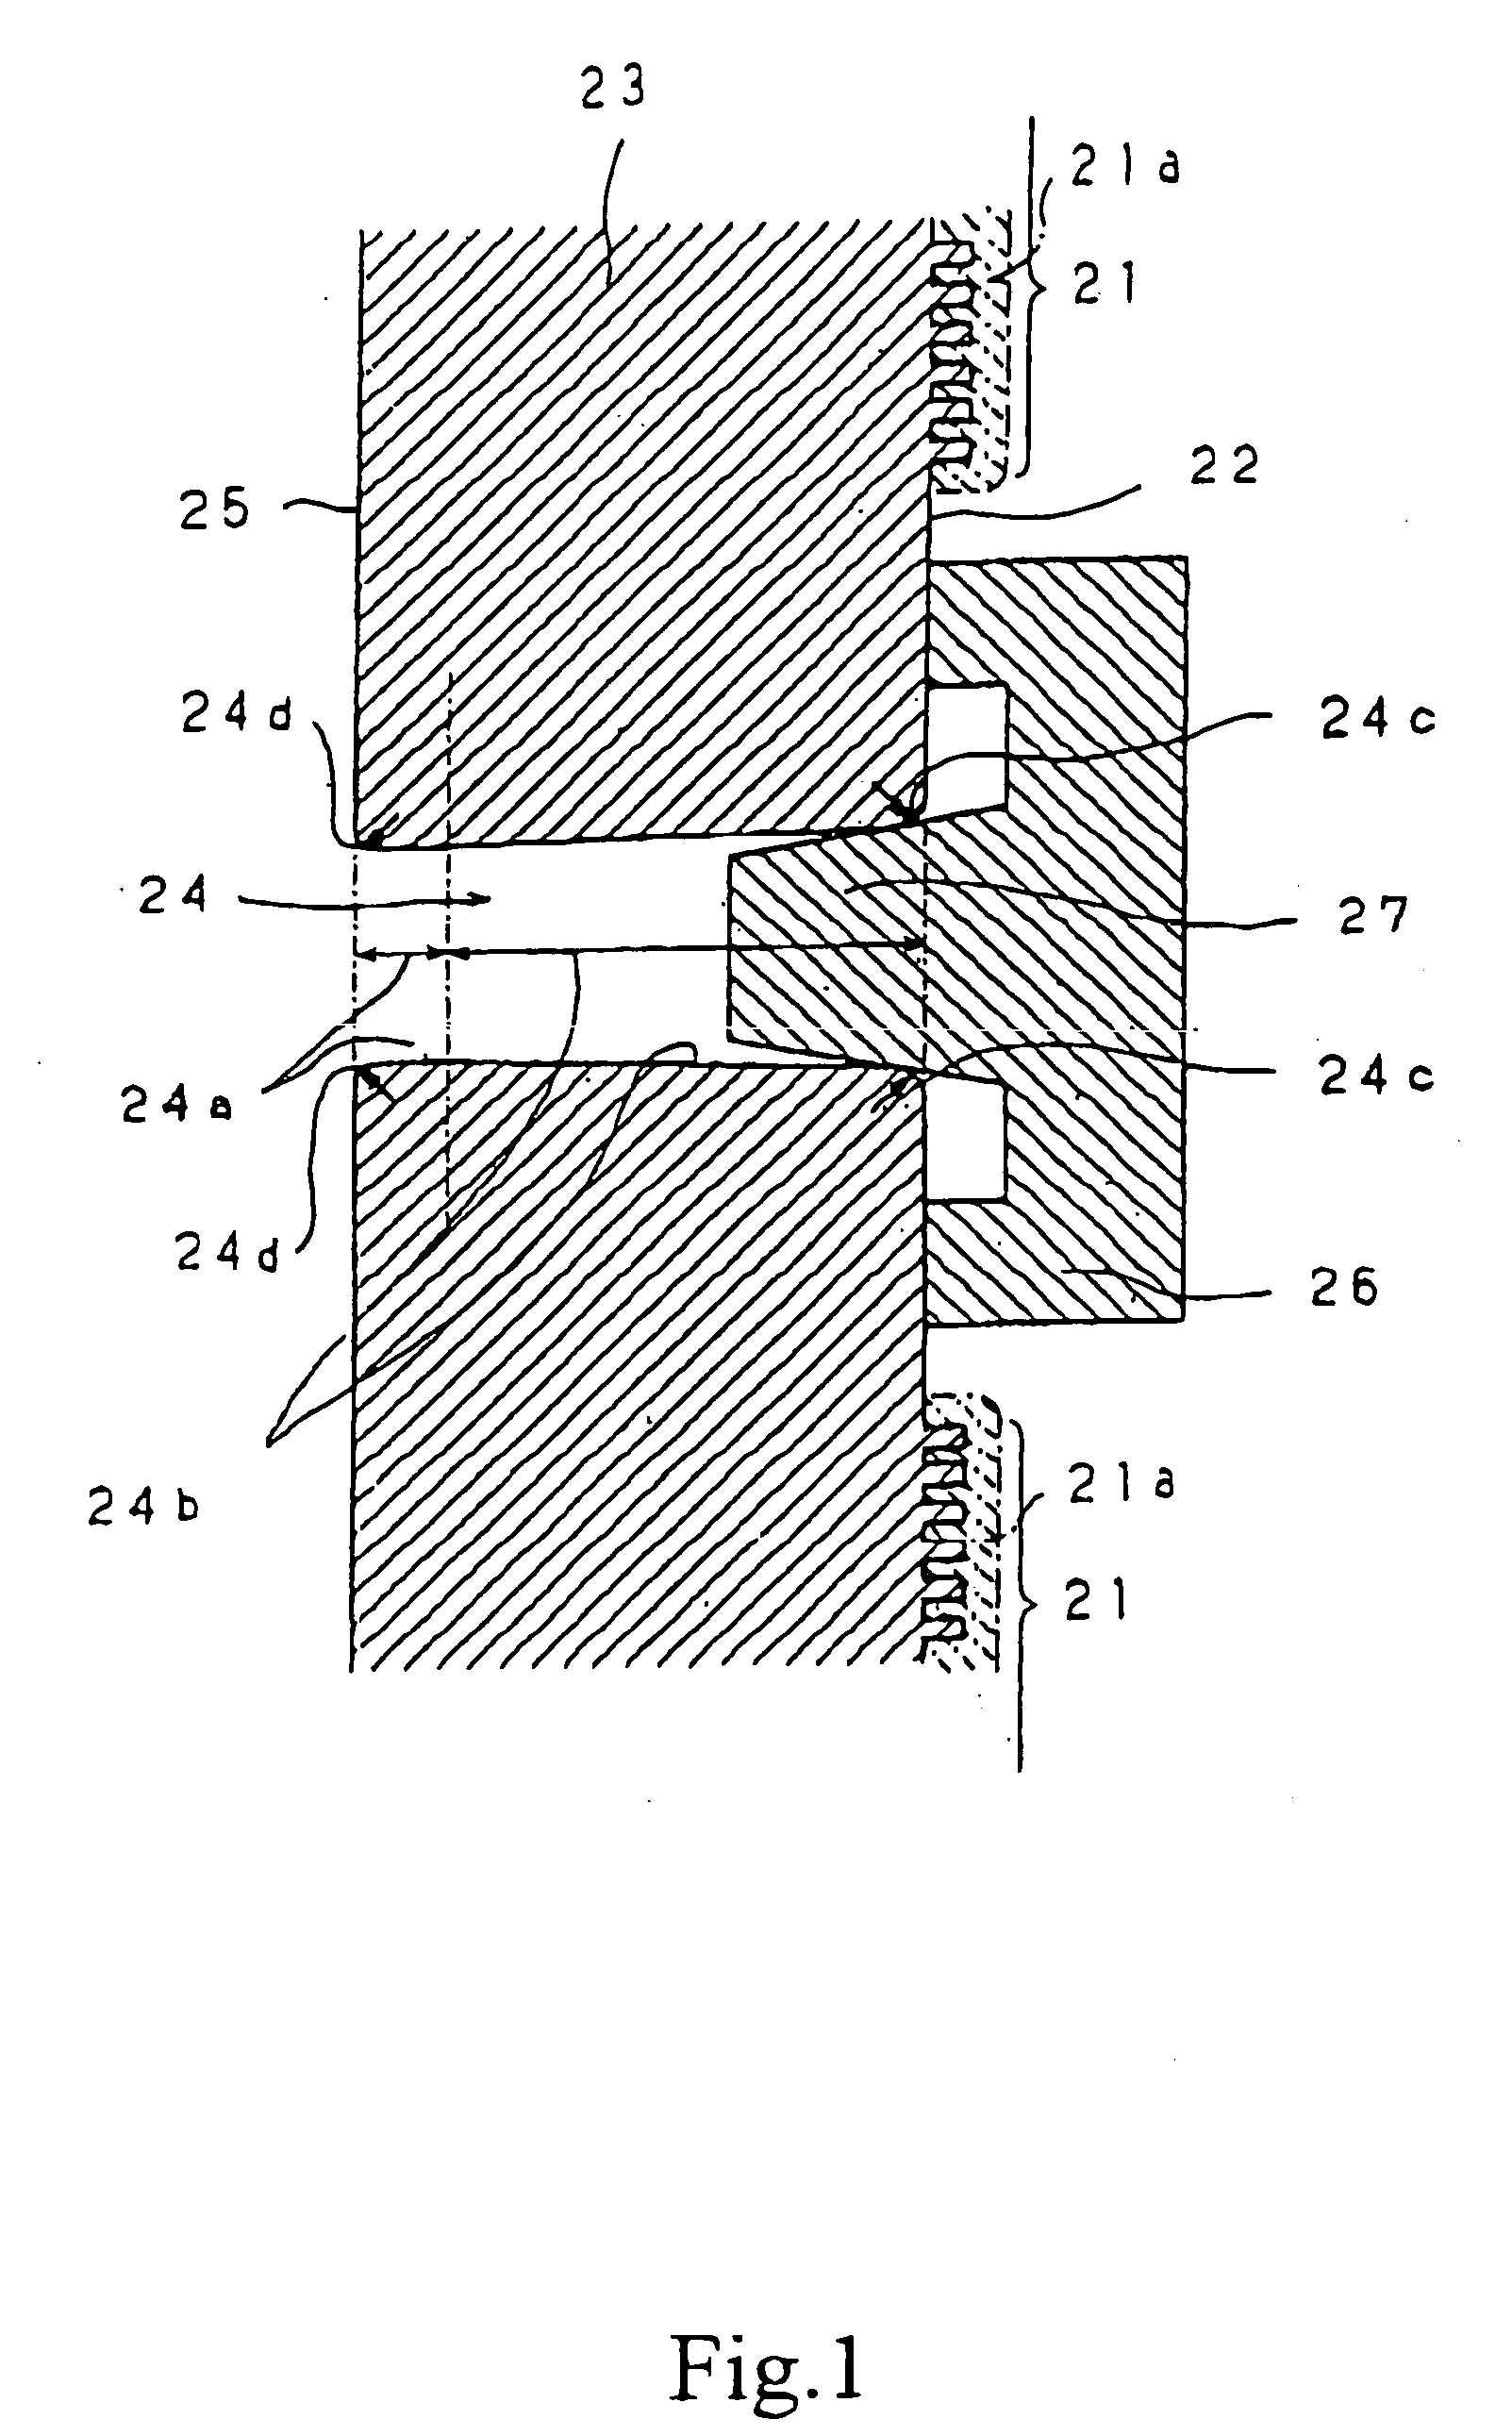 Disk substrate, mold apparatus for injection molding the same, and disk substrate taking-out robot